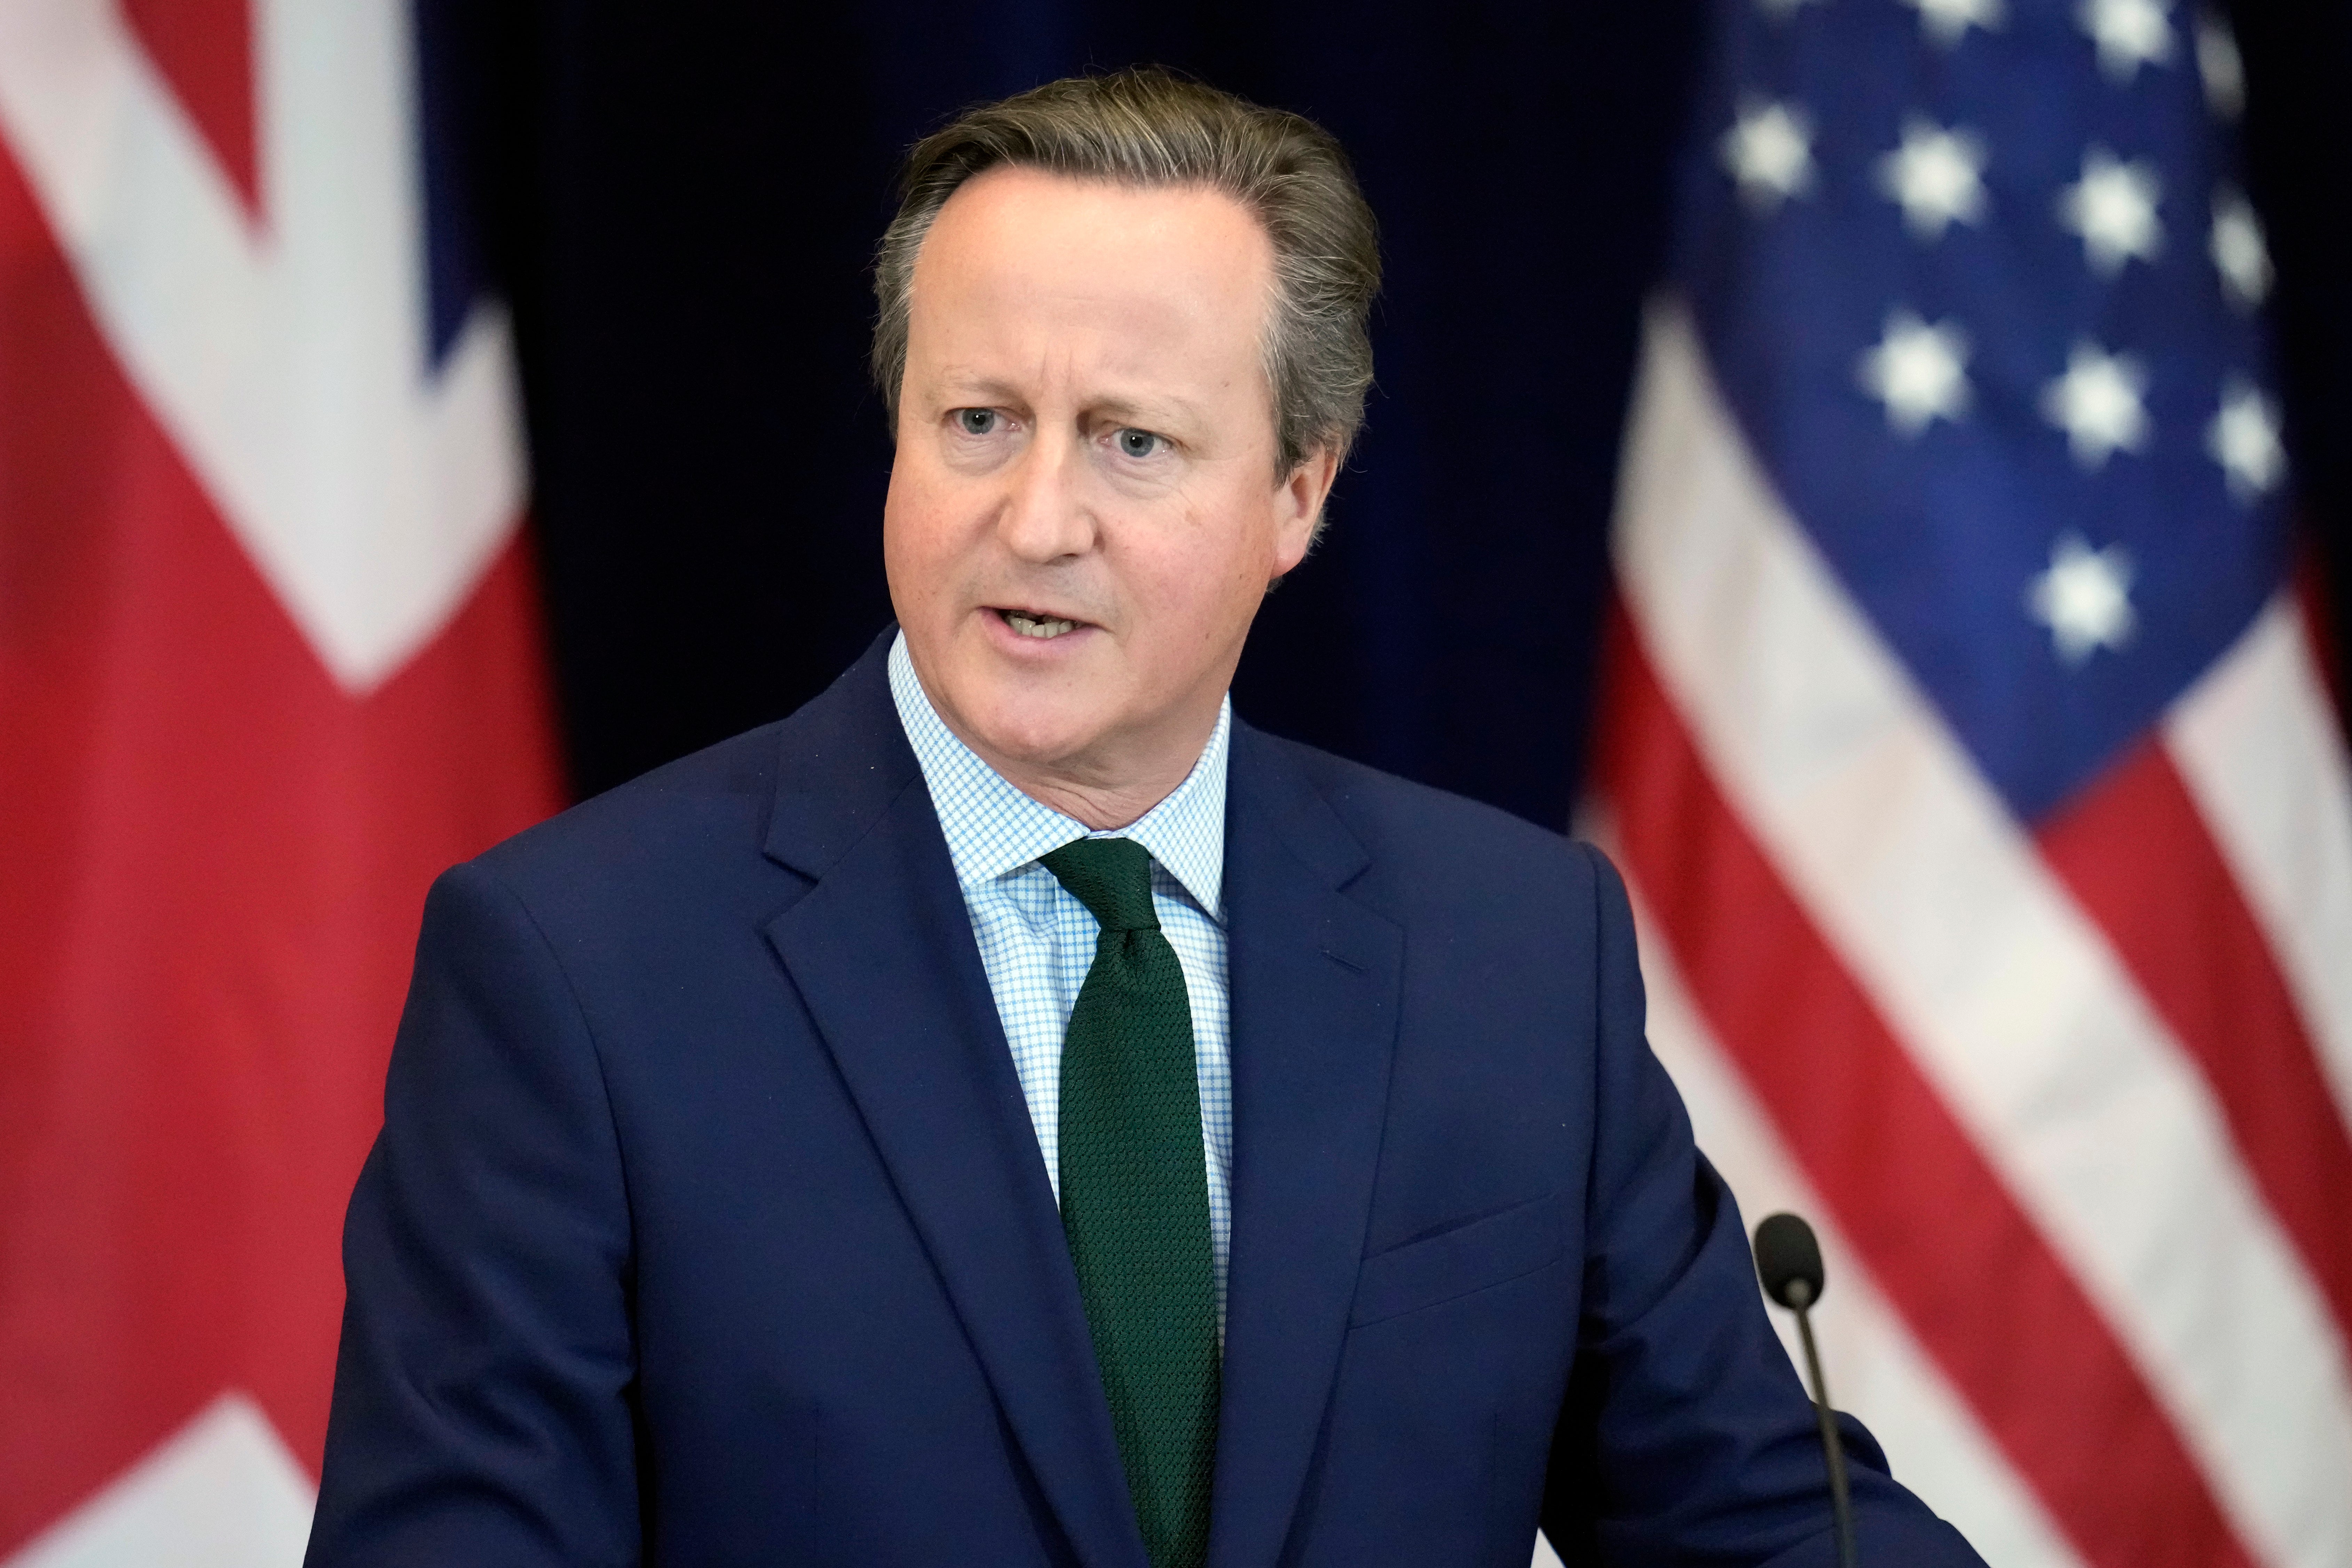 David Cameron was speaking at a visit to the US State Department this week